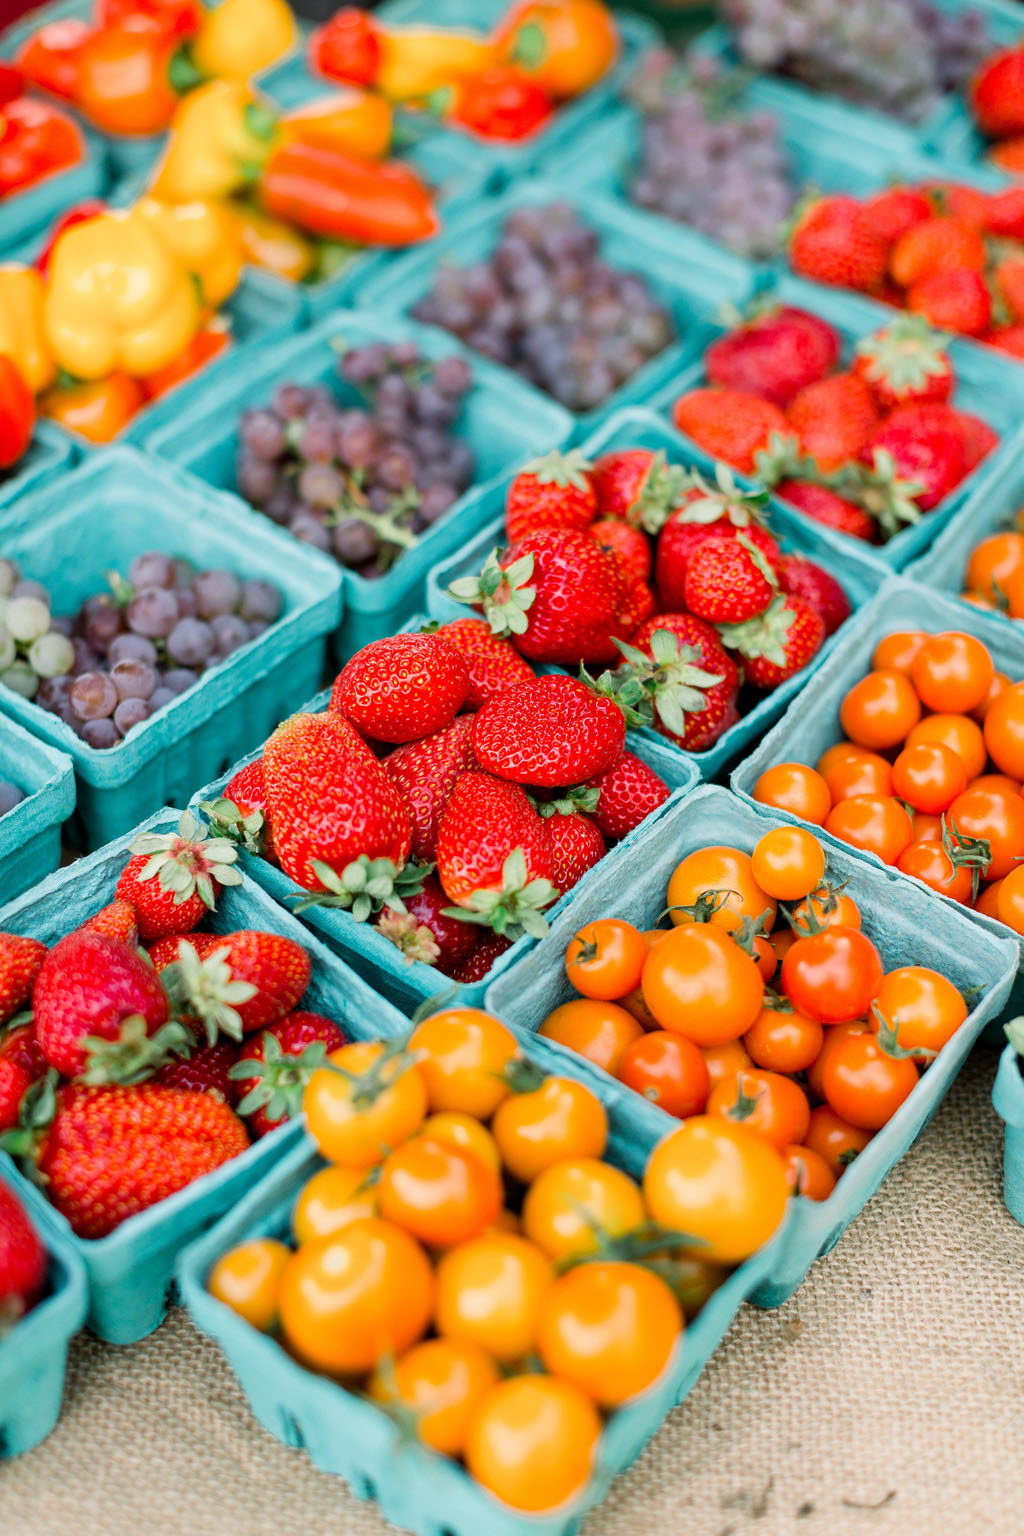 Picture of strawberries and produce at a farmers market